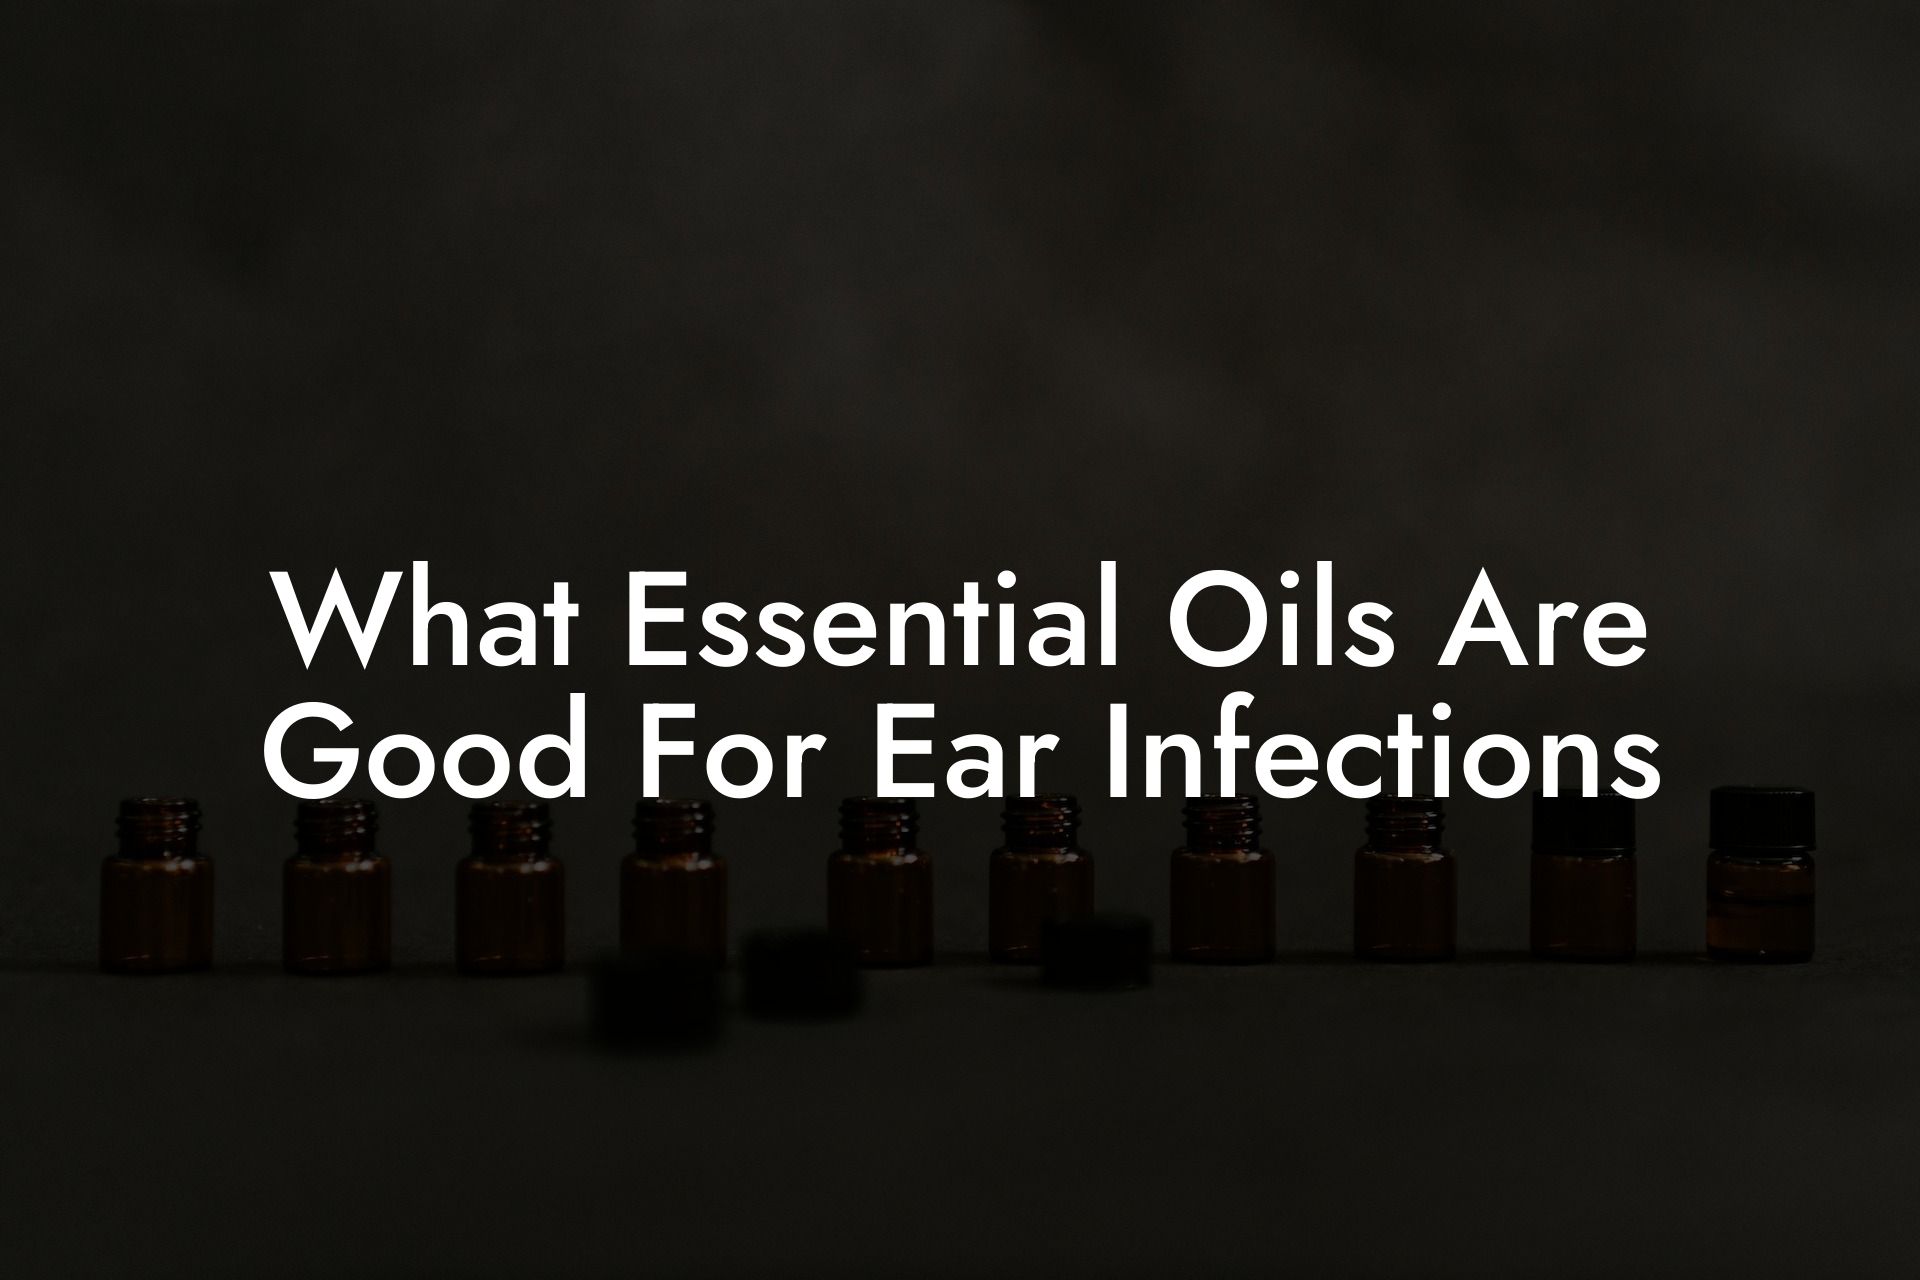 What Essential Oils Are Good For Ear Infections